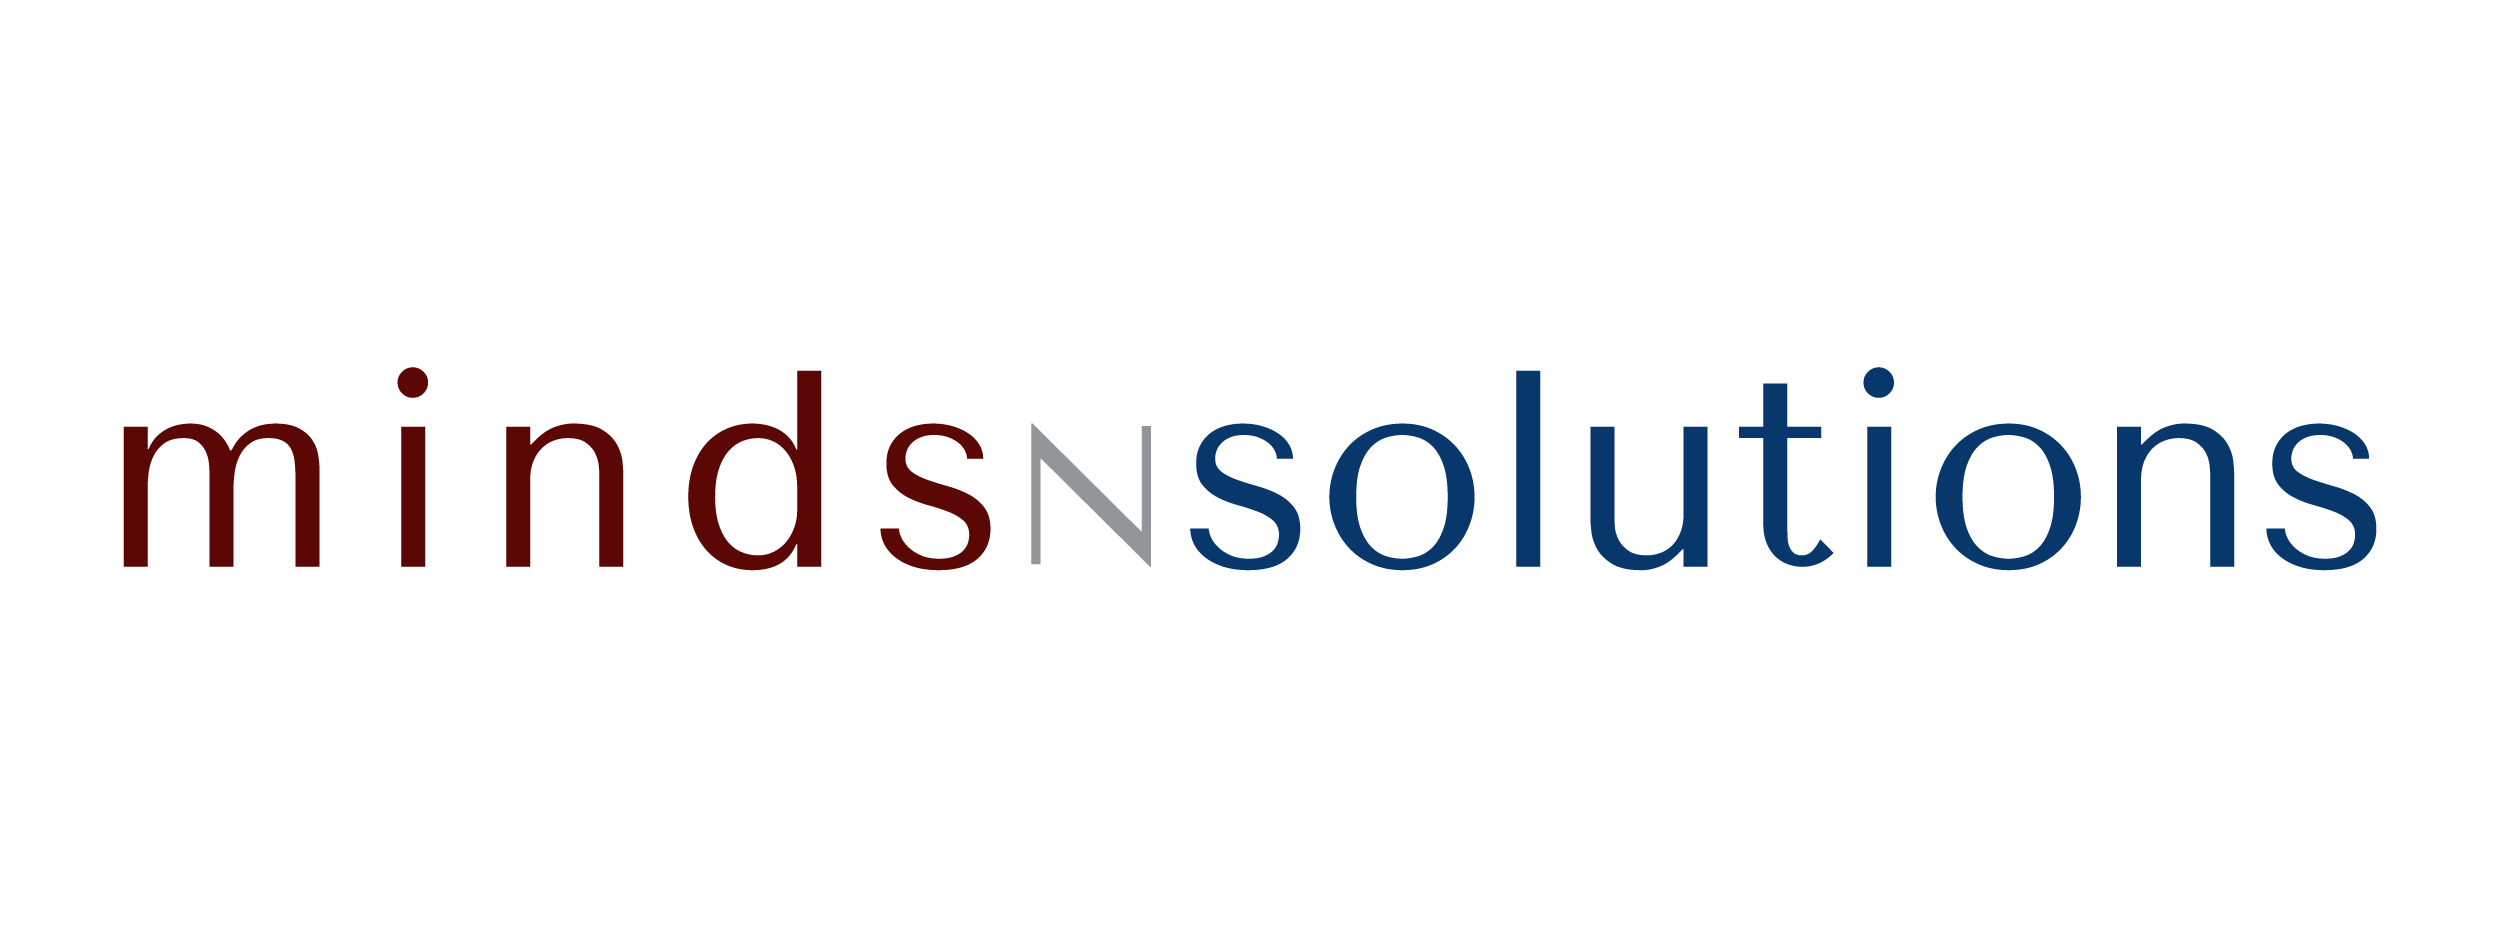 https://www.mindsnsolutions.com/wp-content/uploads/2021/02/Mindsnsolutions-Logo.png